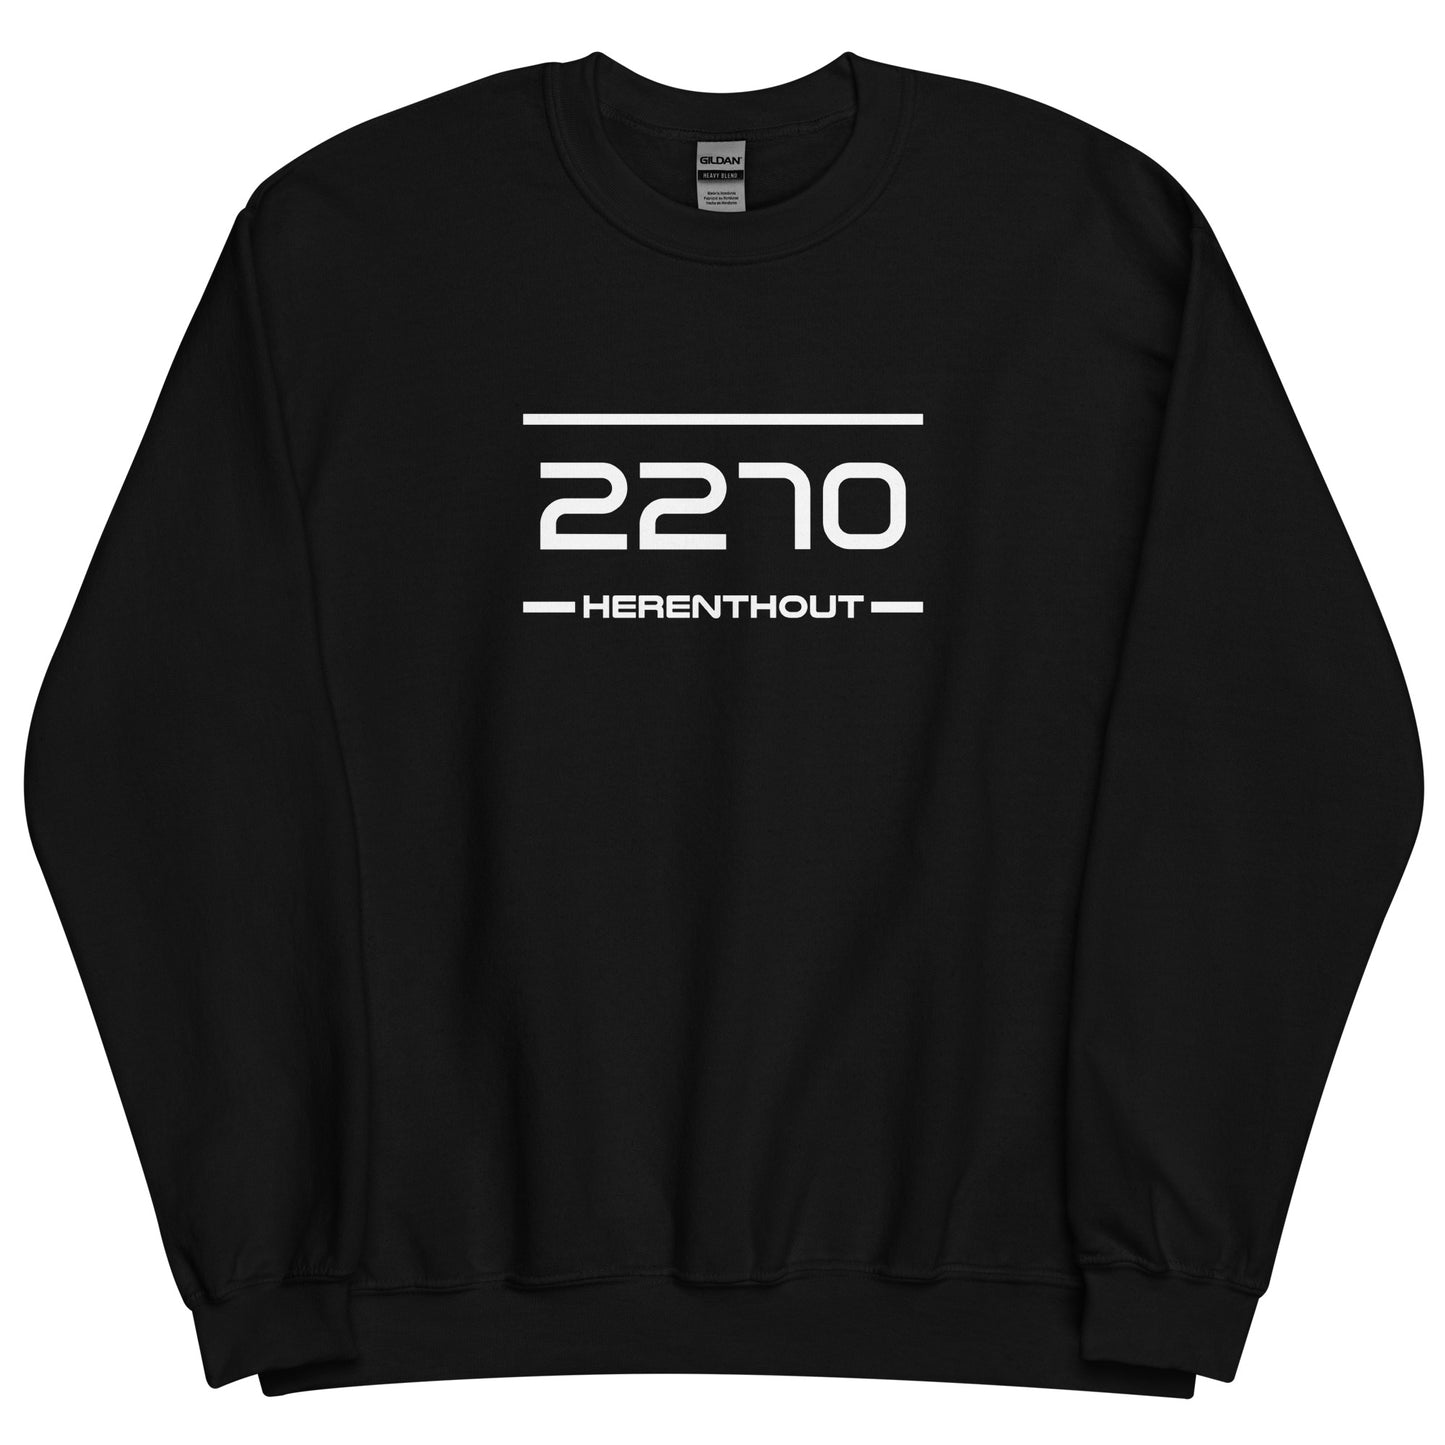 Sweater - 2270 - Herenthout (M/V)